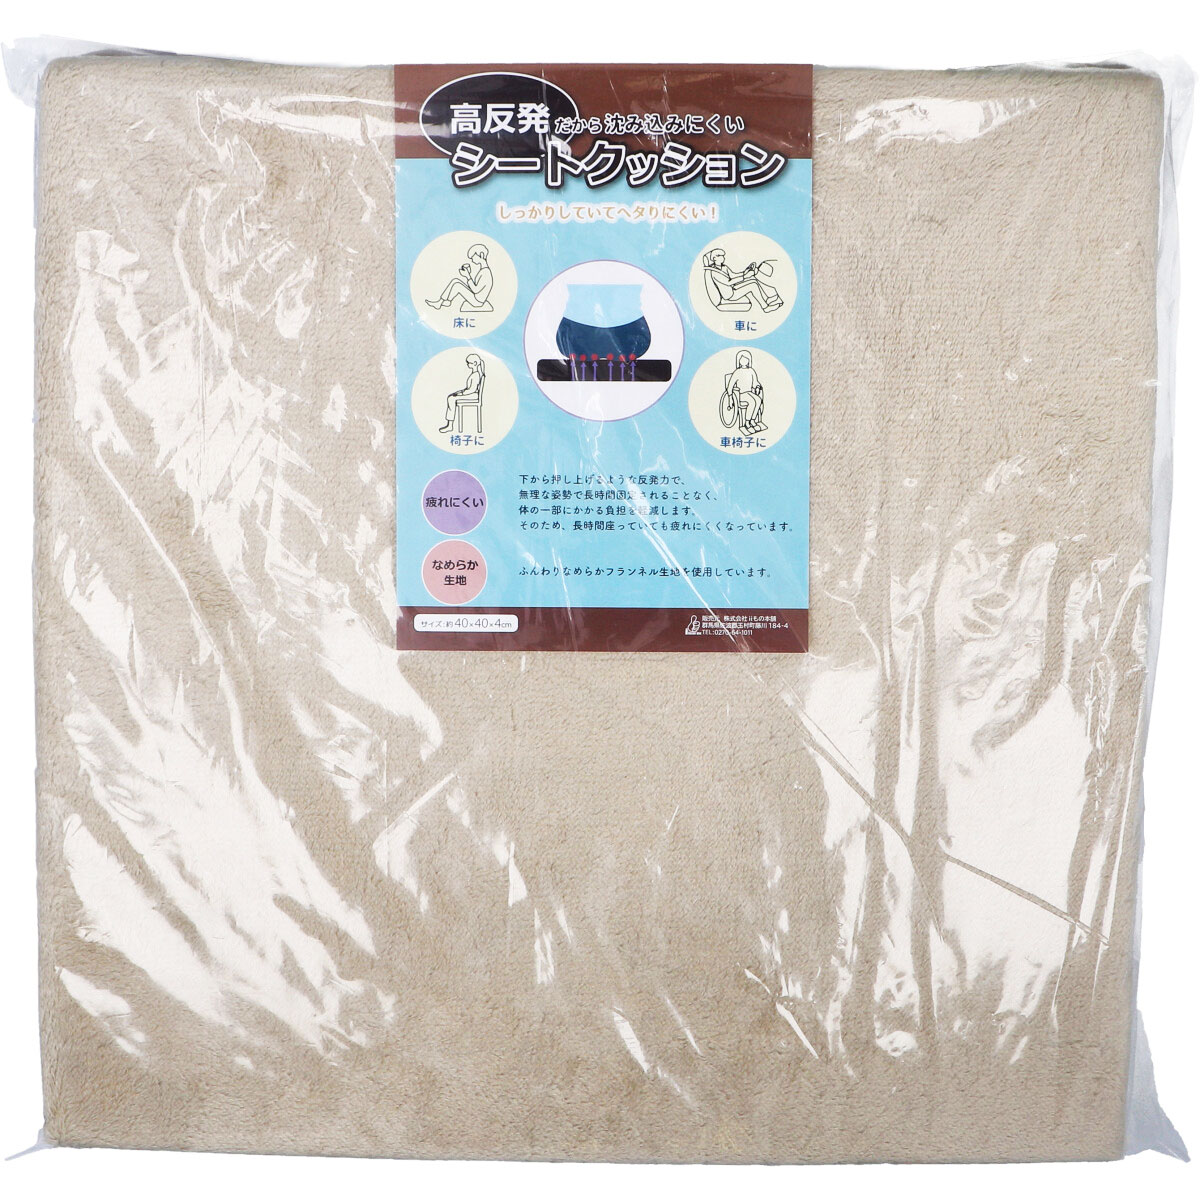 Picture of Beige color High resilience Seat Cushion